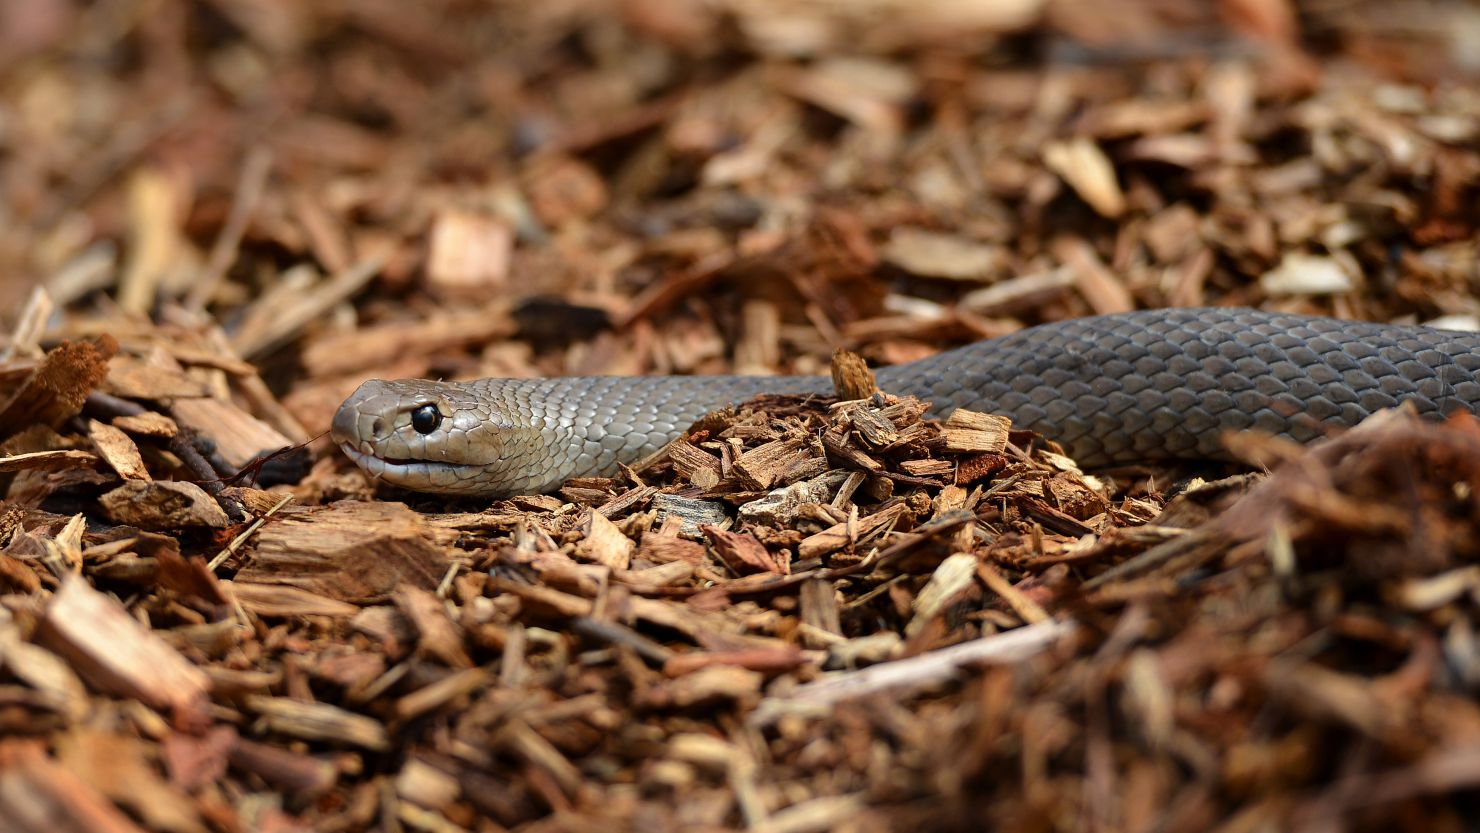 The snakes let loose on campus were later verified as non-venomous.